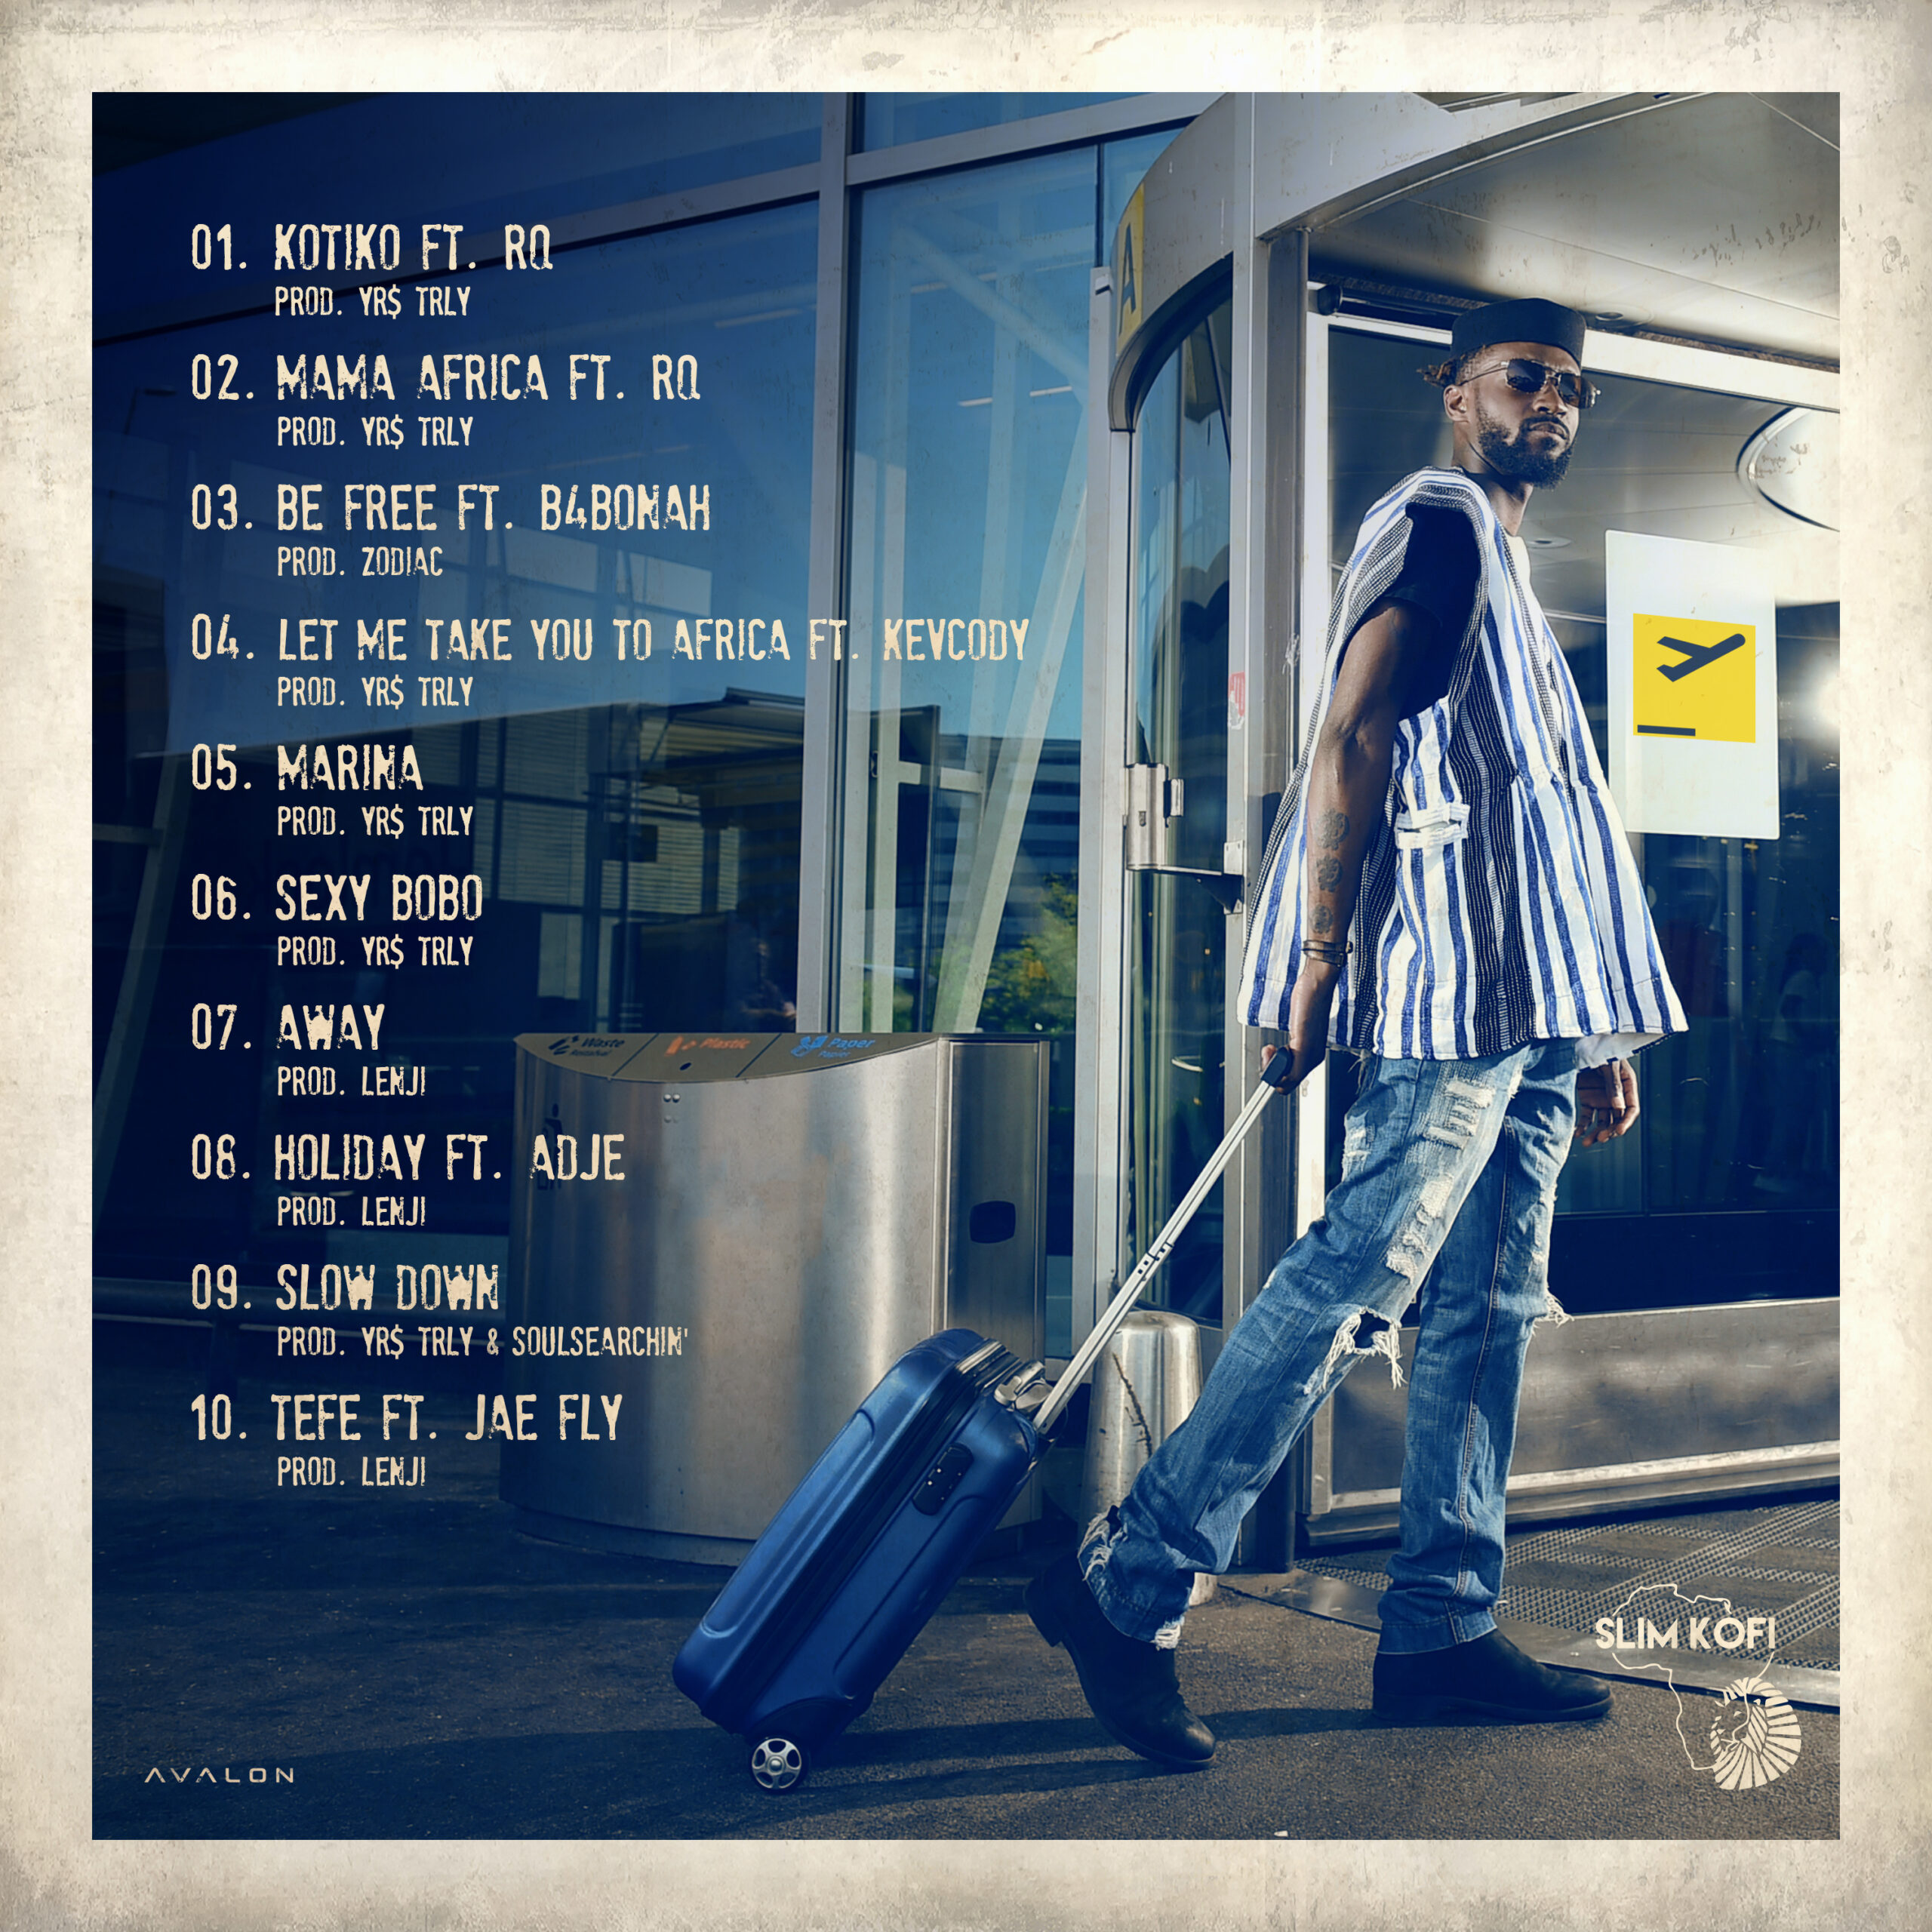 Tracklist: Let Me Take You To Africa EP